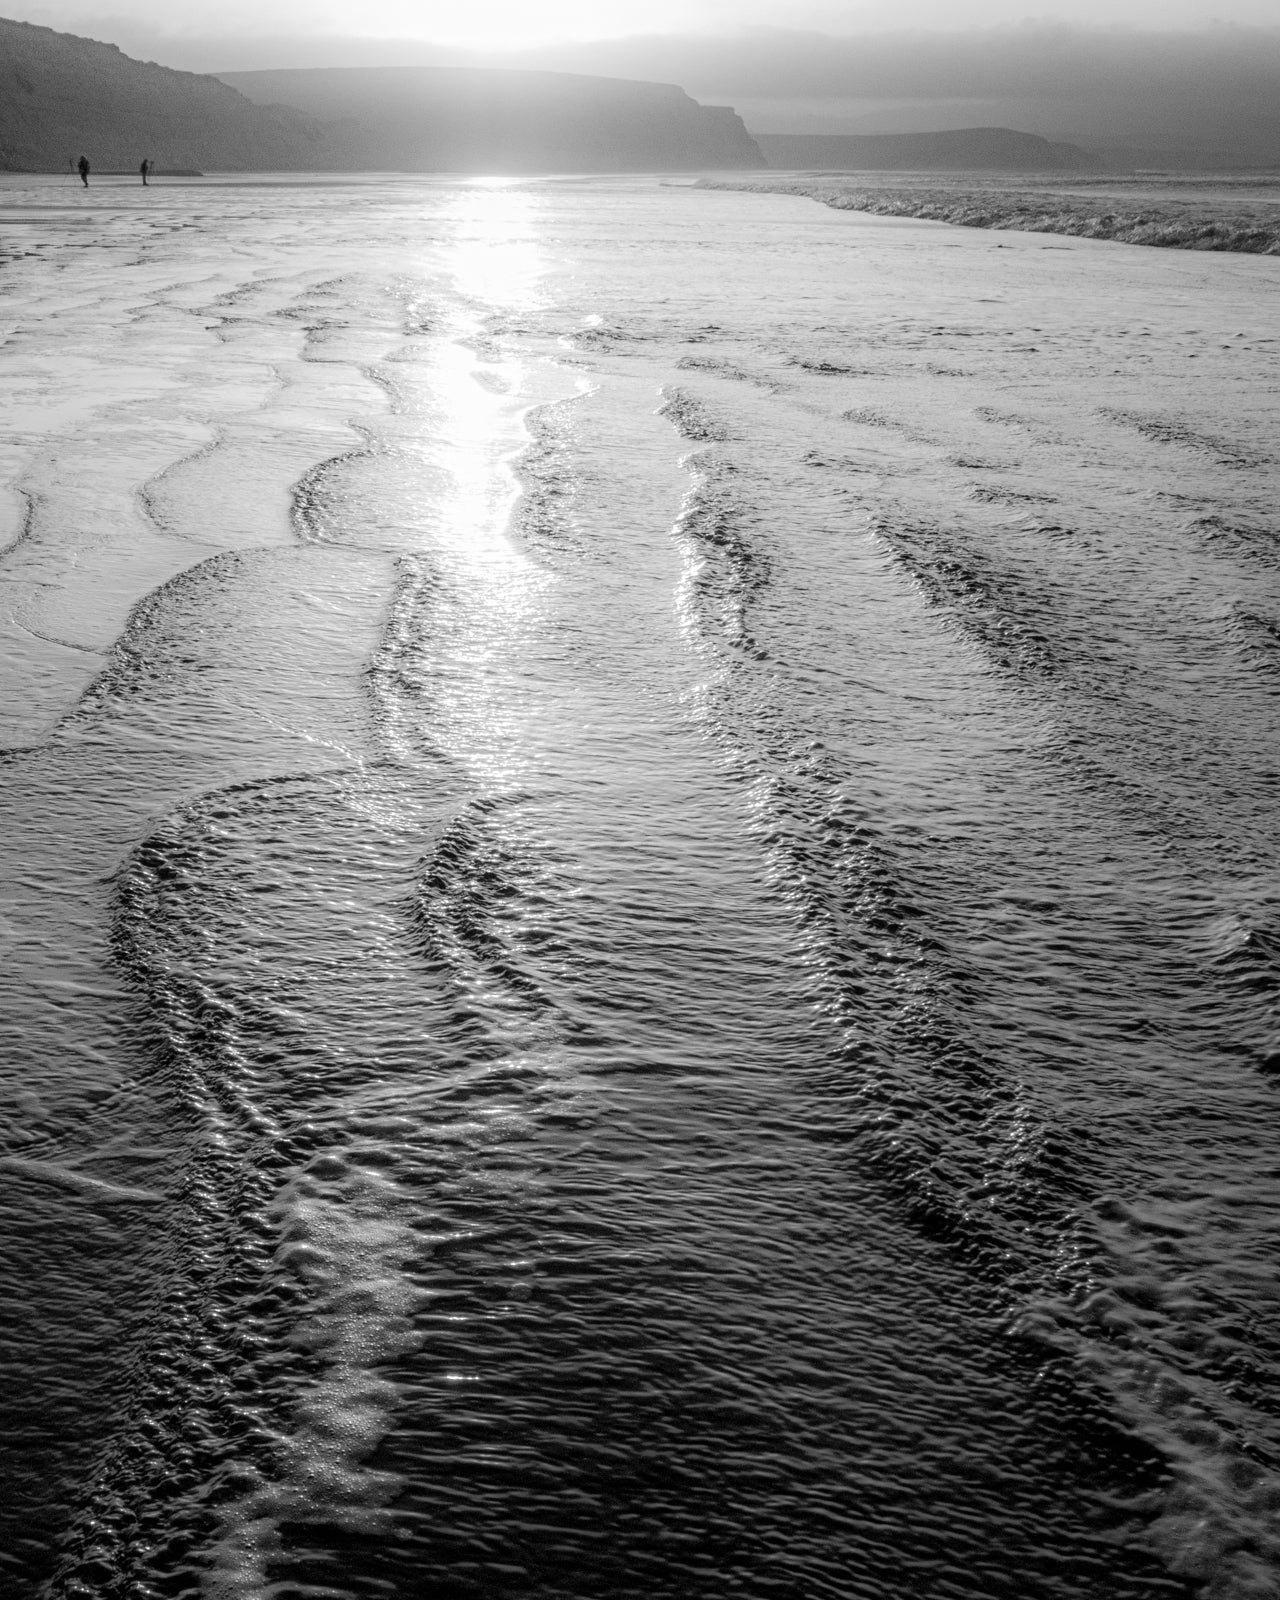 Transitions: Mary Martin DeShaw: Lines in the Sand 2